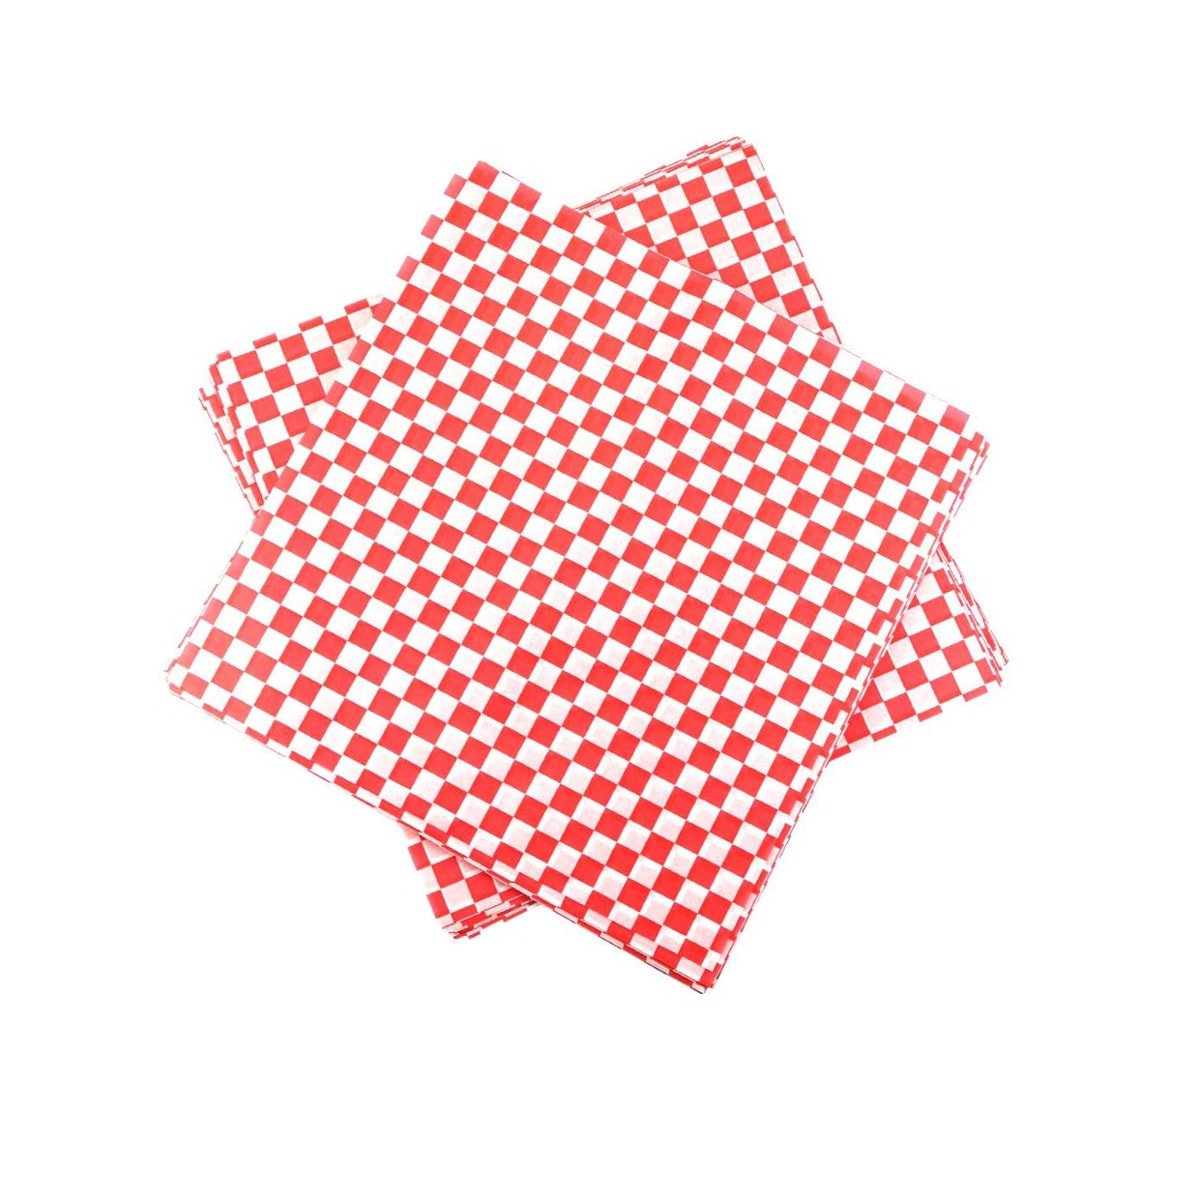 A stack of red and white checkered basket liners.